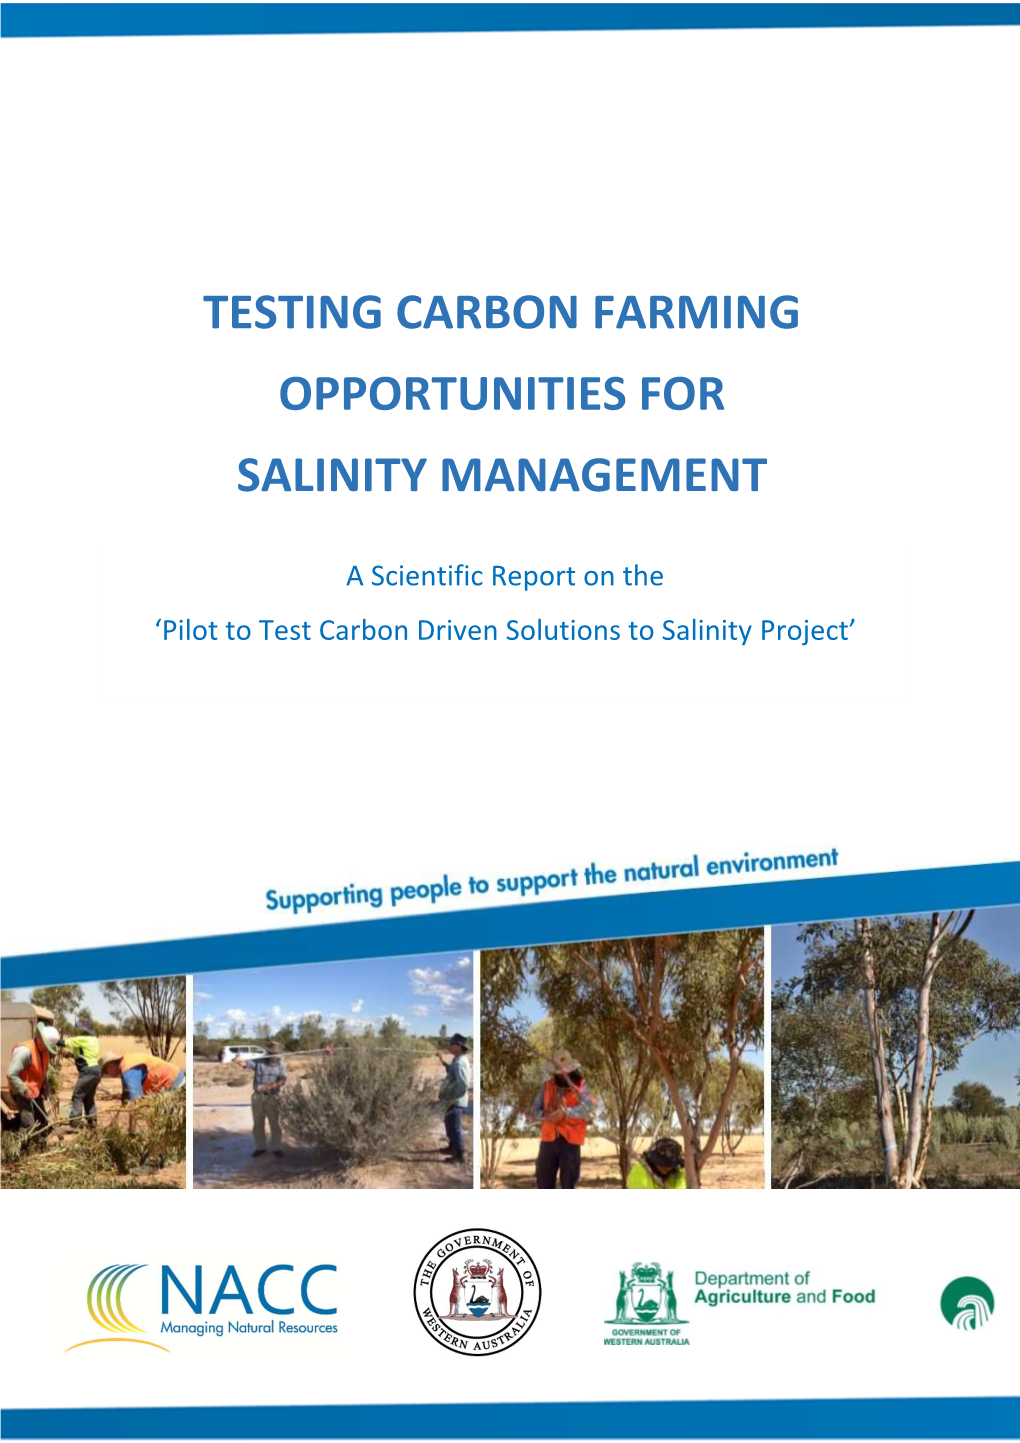 2 MB 01 May 2015 Testing Carbon Farming Opportunities for Salinity